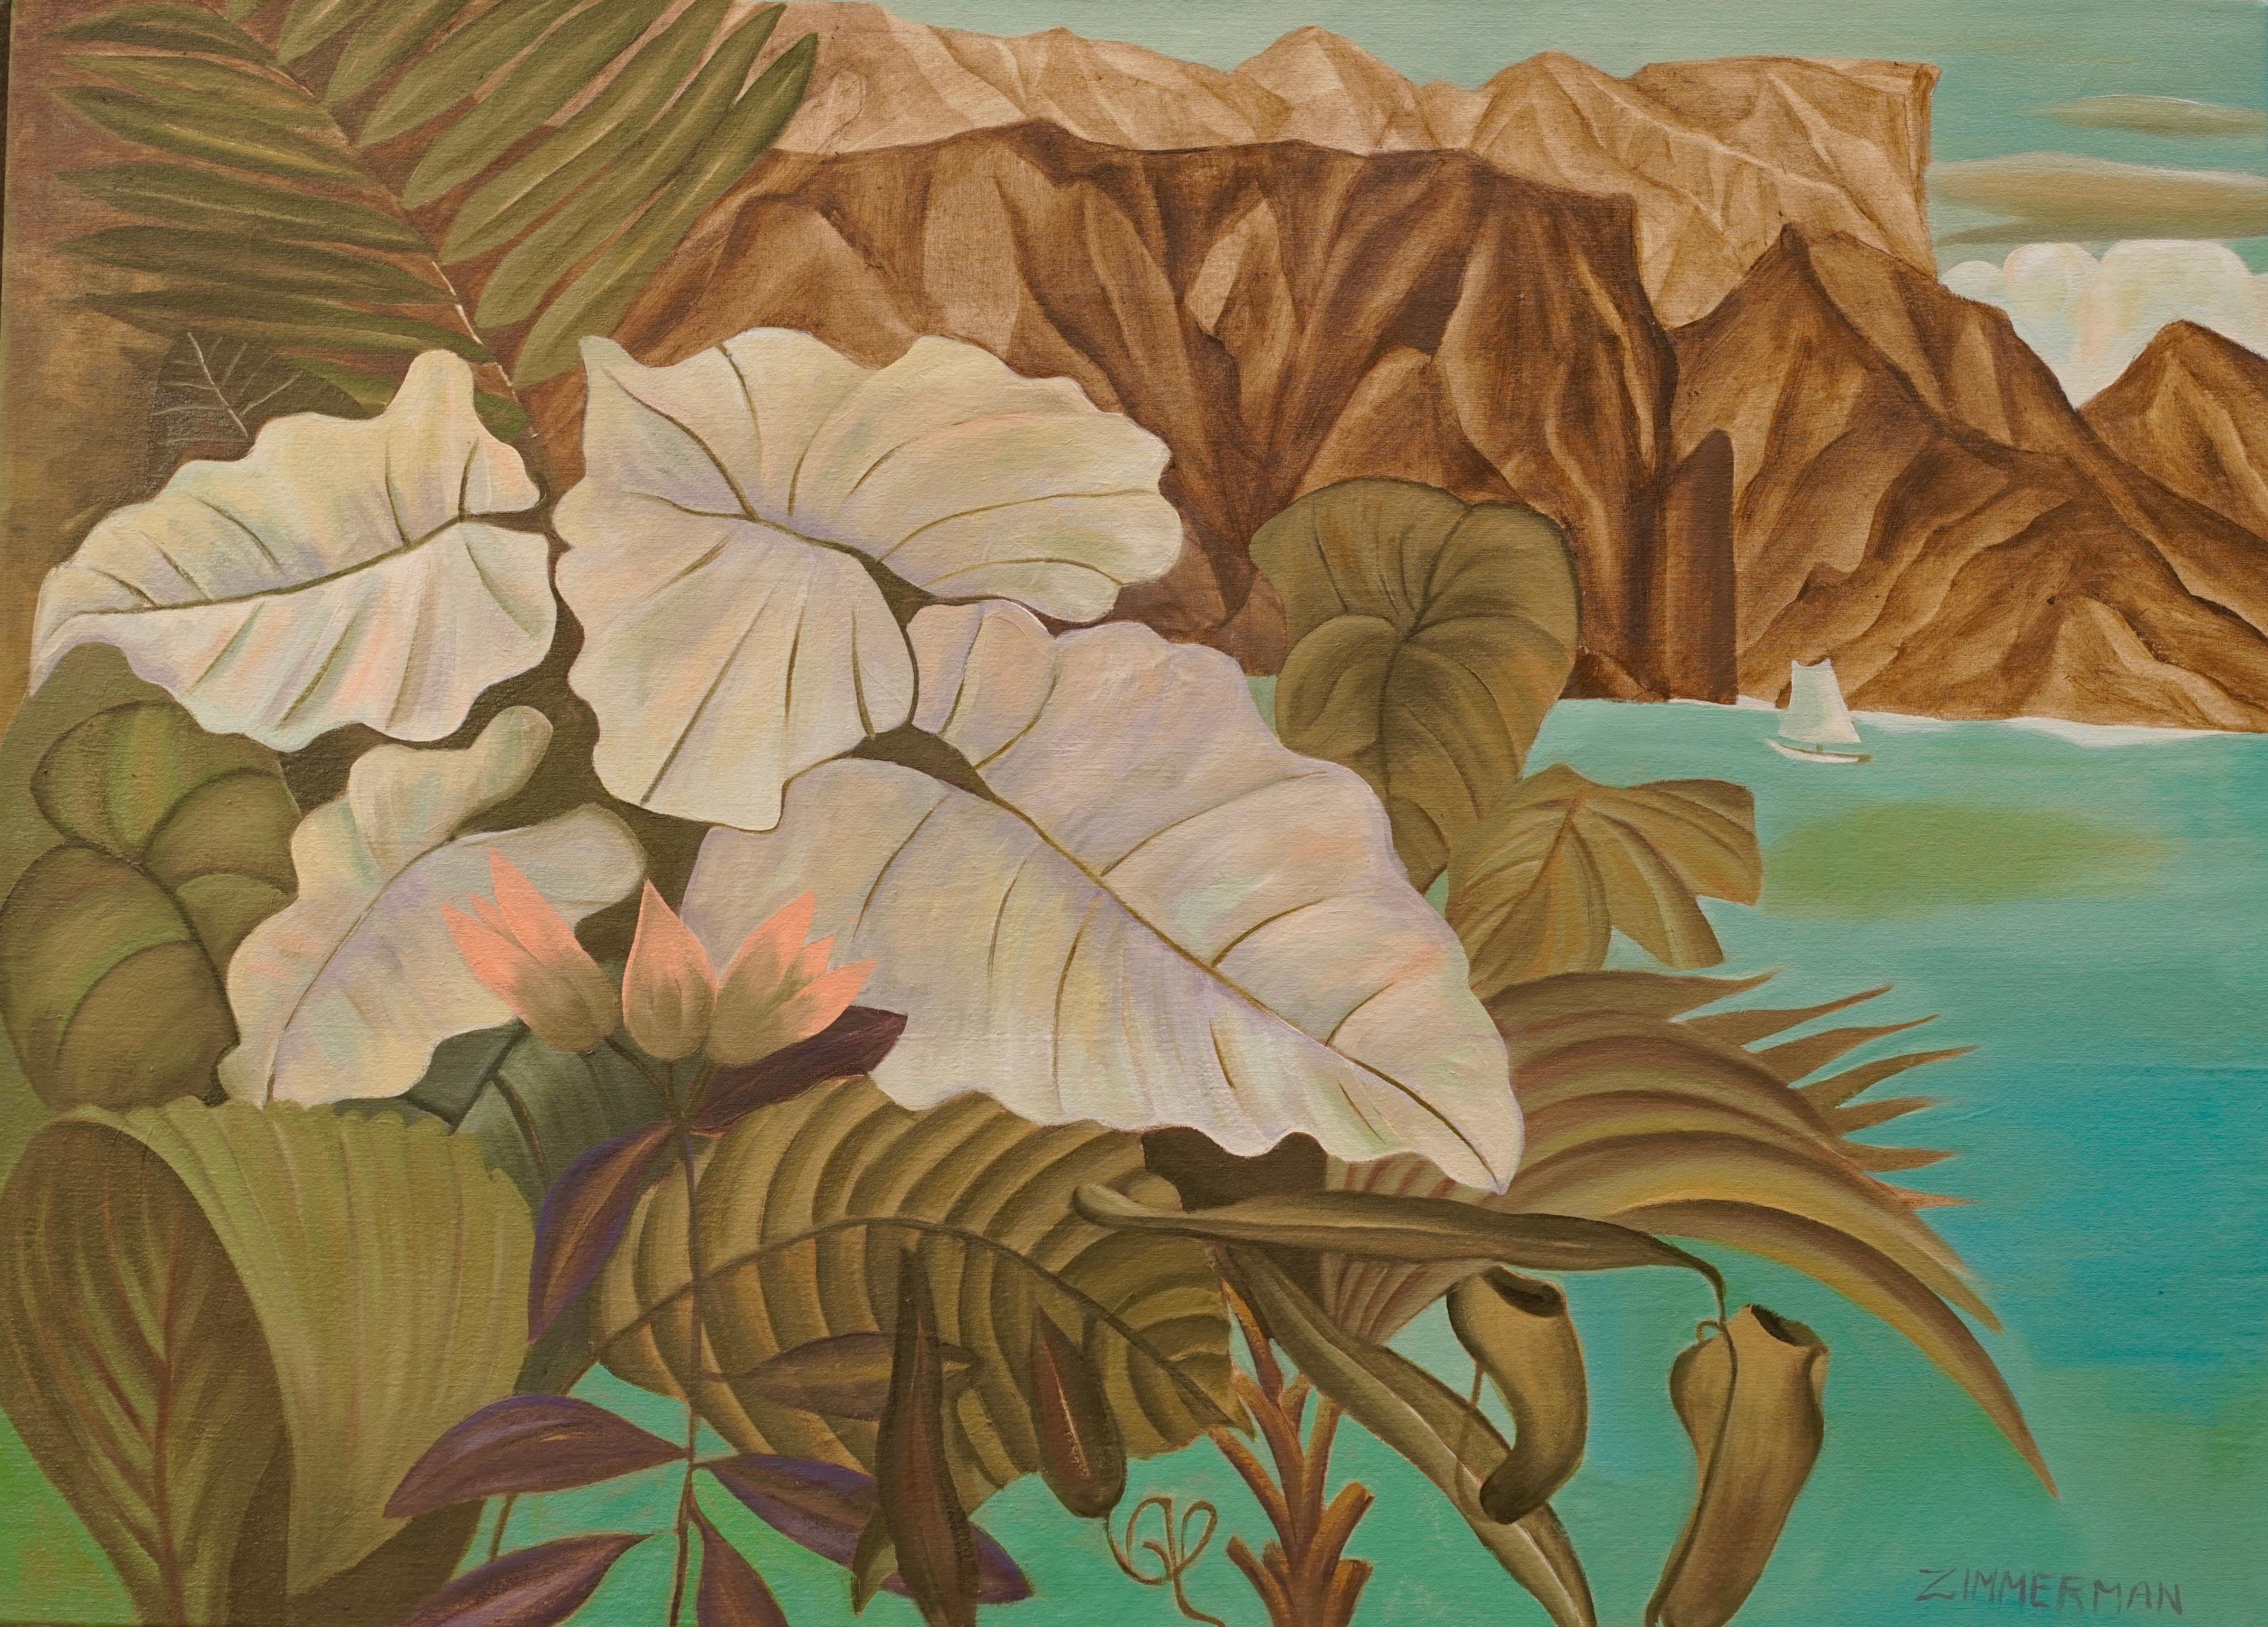 A turquoise sea sets off this tropical landscape of earthy colors of ocher and olive green.  Pastel peach flowers accent an otherwise subtle color palette.

'Napali' - Landscape Painting - Oil on Canvas By Marc Zimmerman

This masterpiece is